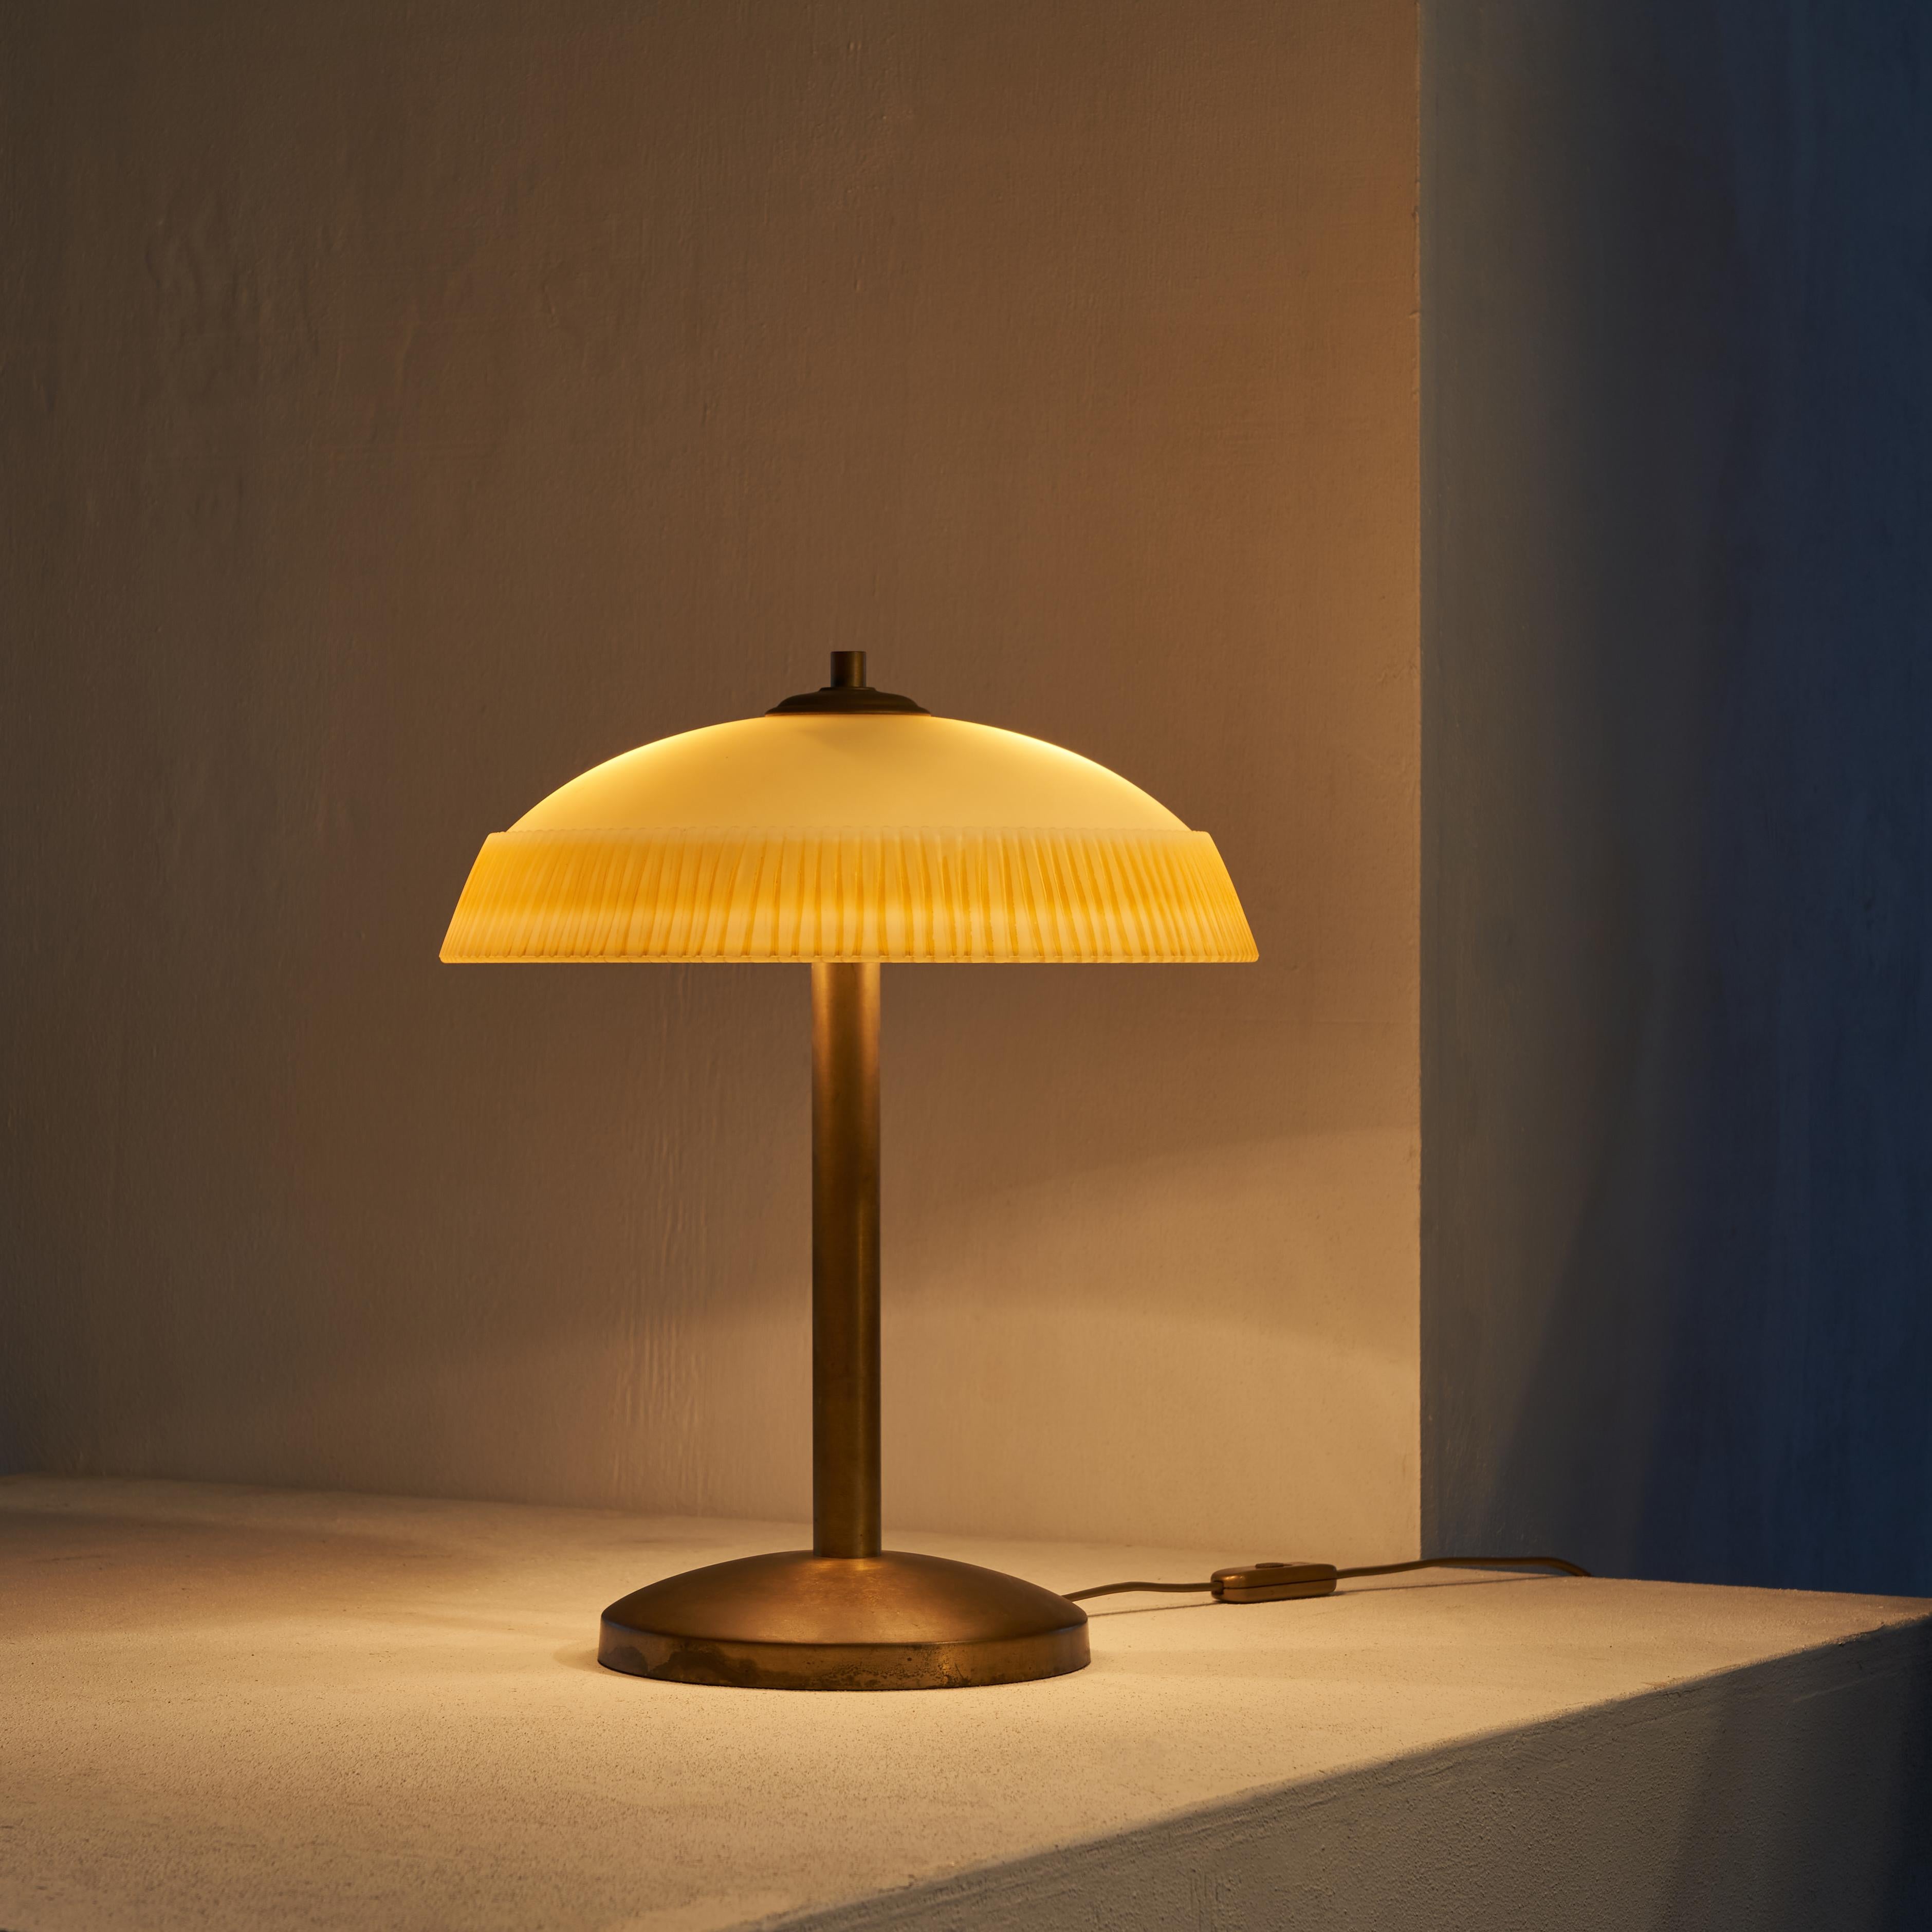 Very delicate and beautiful table lamp with a nicely patinated brass foot and stem. A delightful design with hints to modernism and art deco at the same time. 

The 'Pâte de Verre' glass is very thick and has a decorative ribbed rim and a great